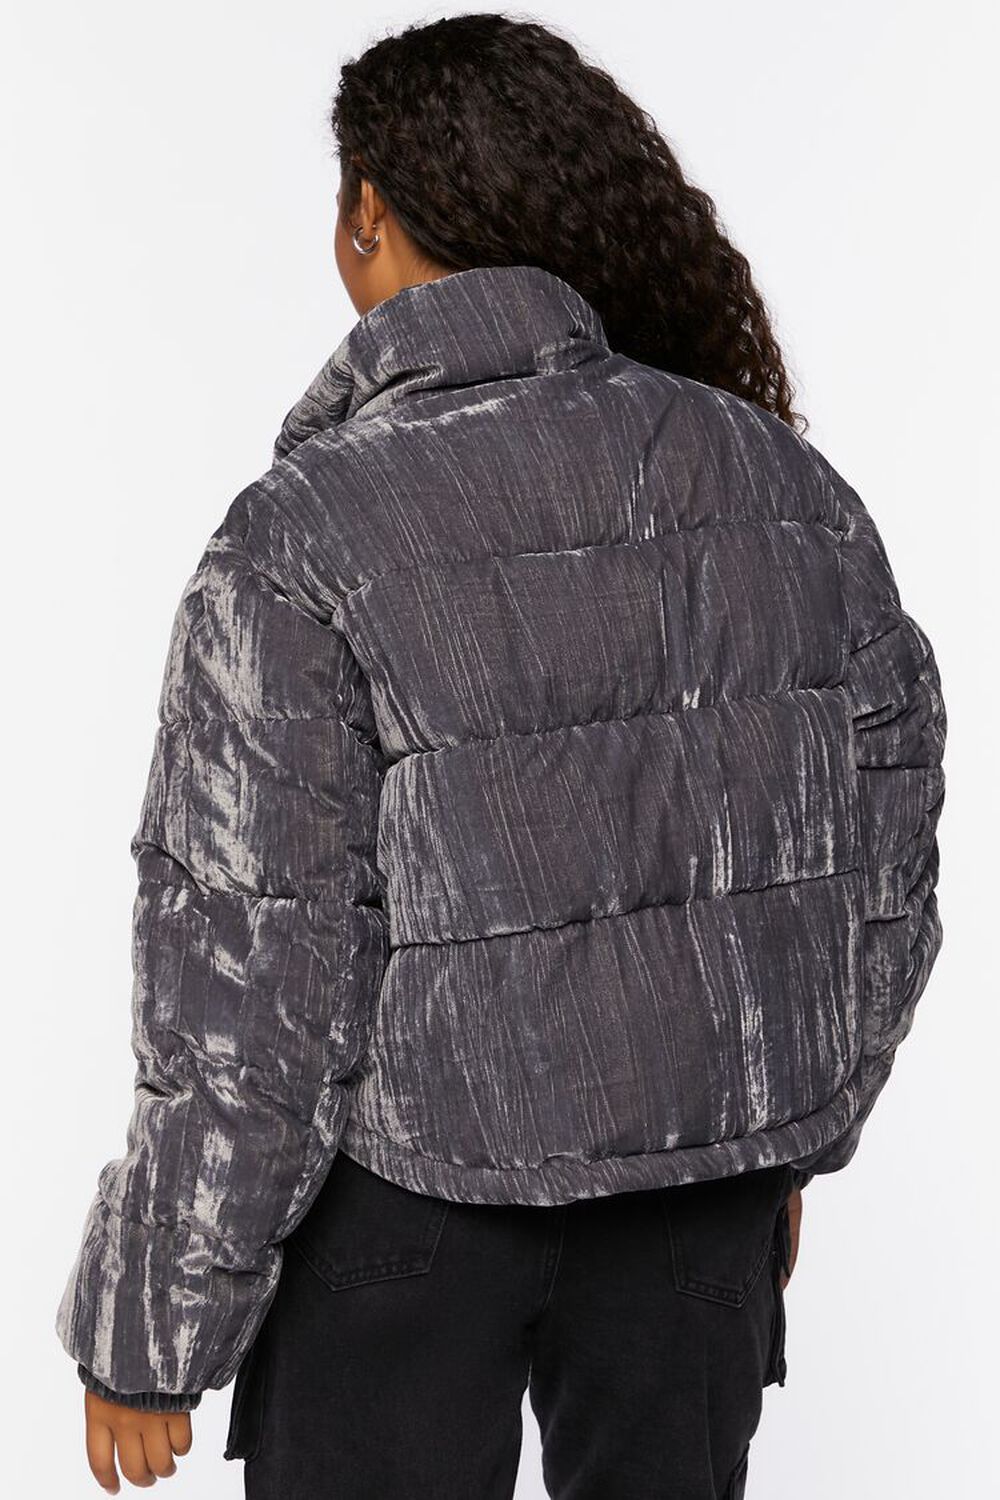 CHARCOAL Quilted Puffer Jacket, image 3